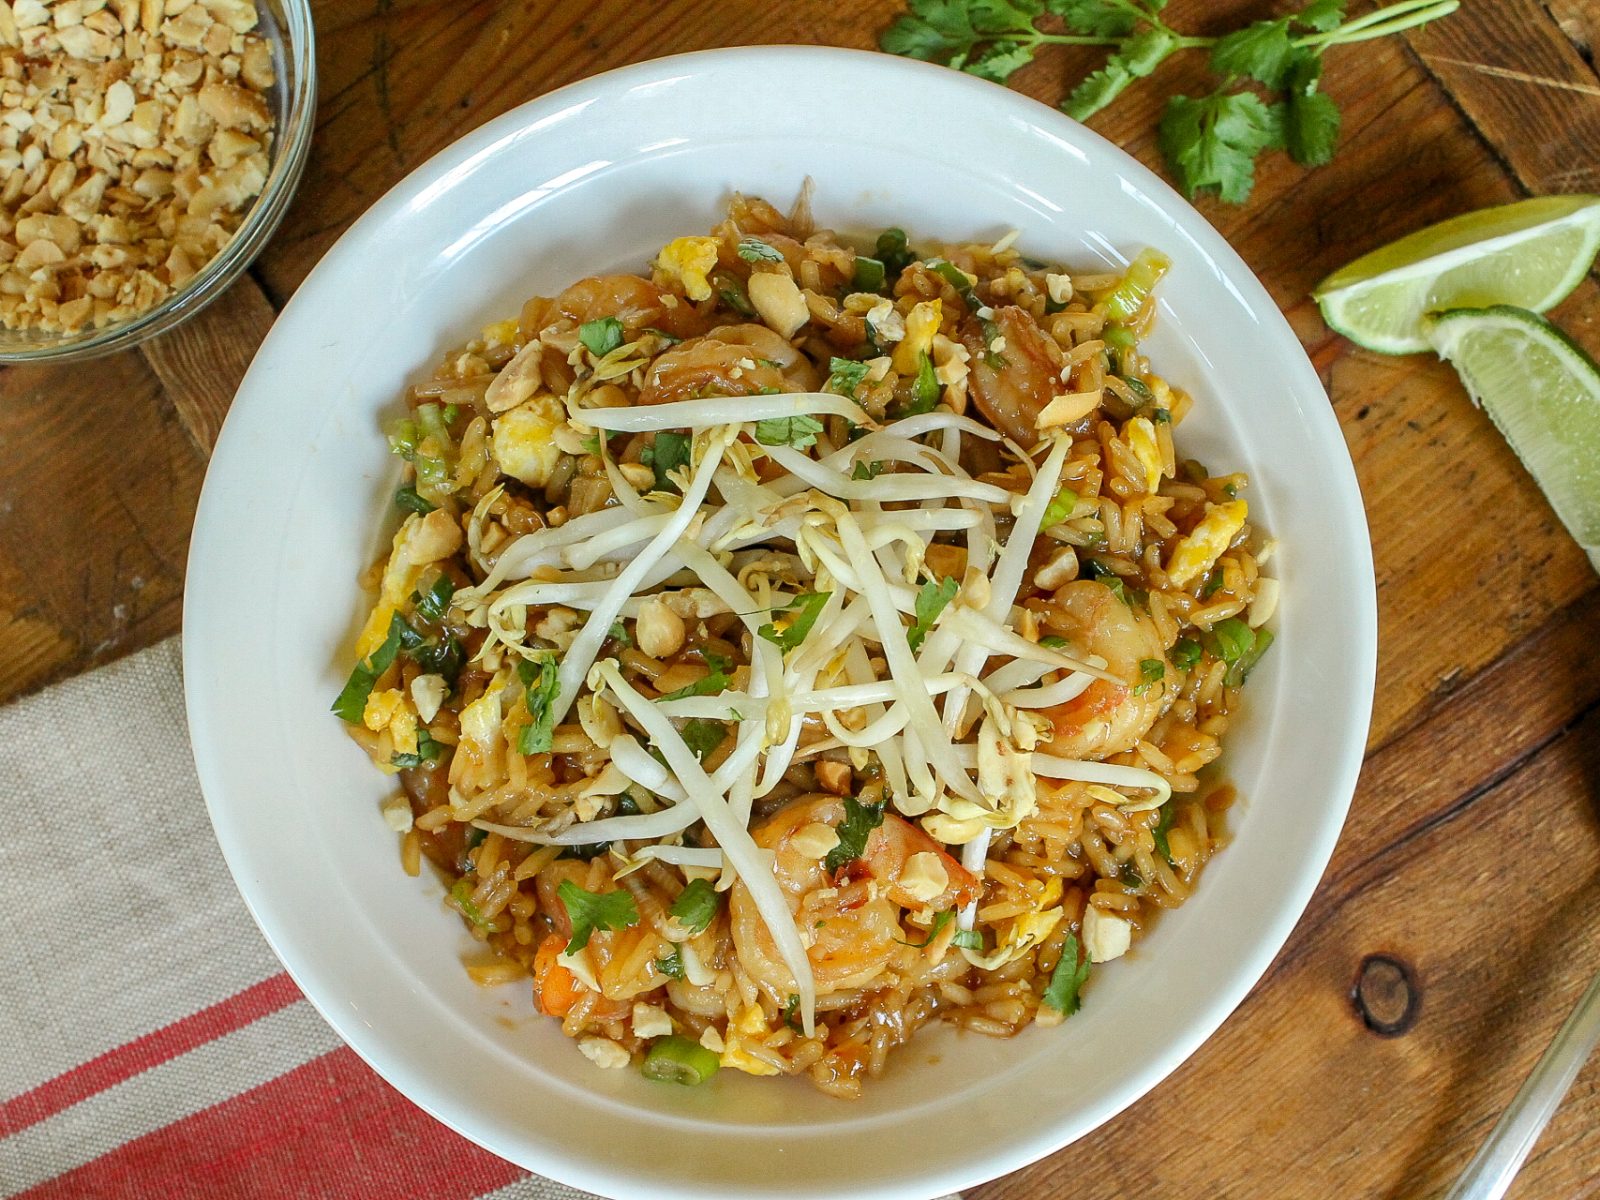 Use The New Success Rice Coupon To Make Shrimp Pad Thai with Jasmine Rice – Quick, Easy & Delicious!